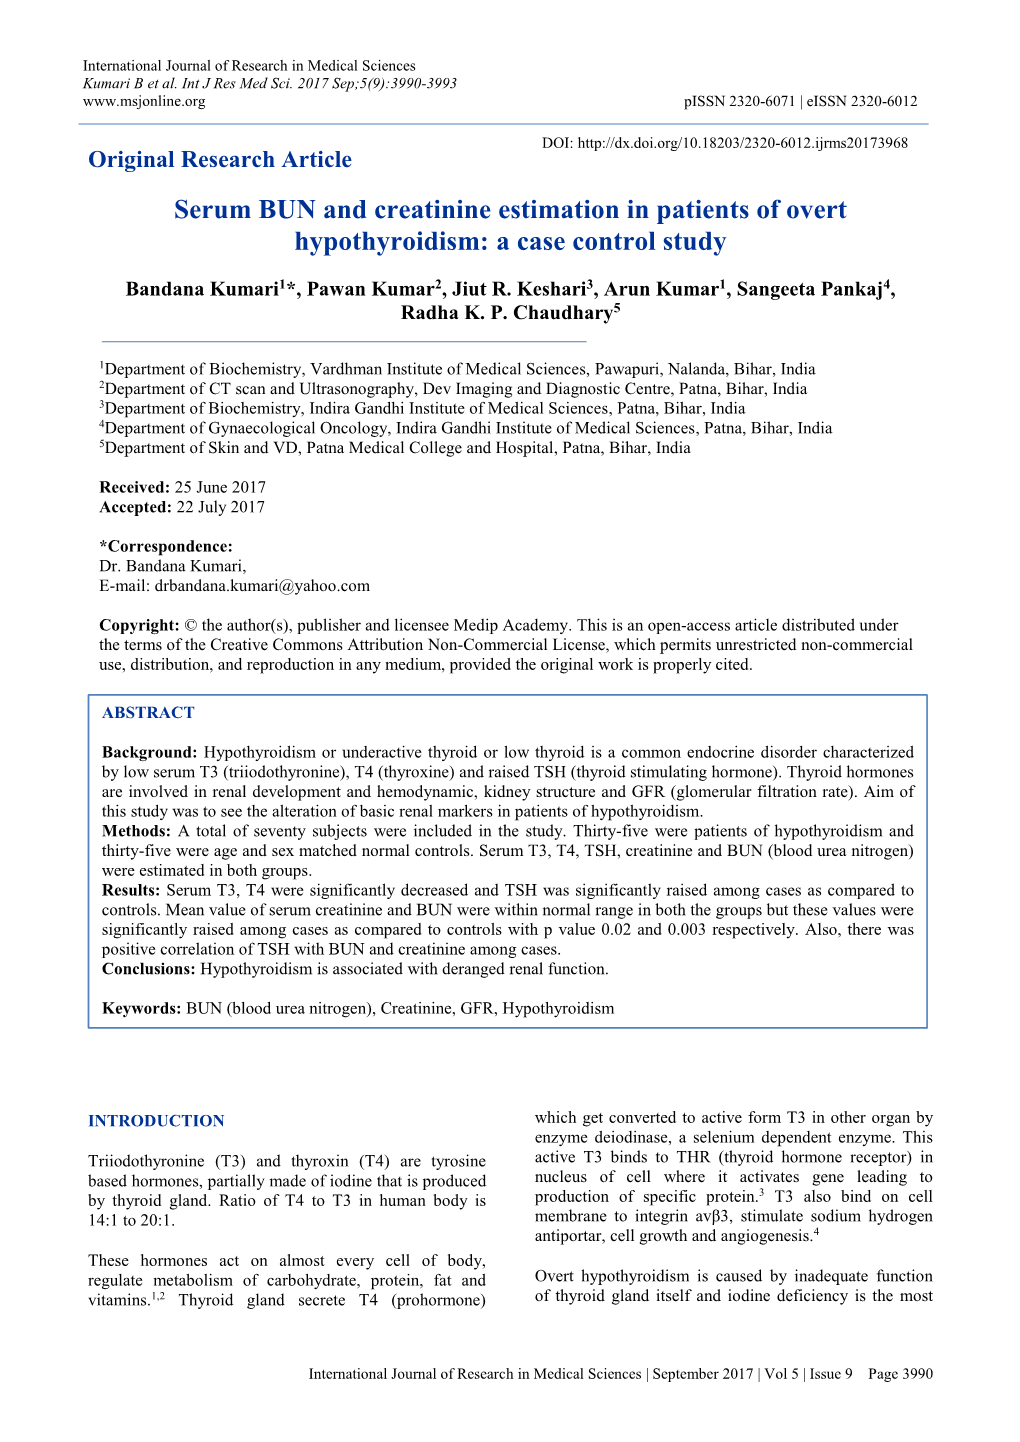 Serum BUN and Creatinine Estimation in Patients of Overt Hypothyroidism: a Case Control Study